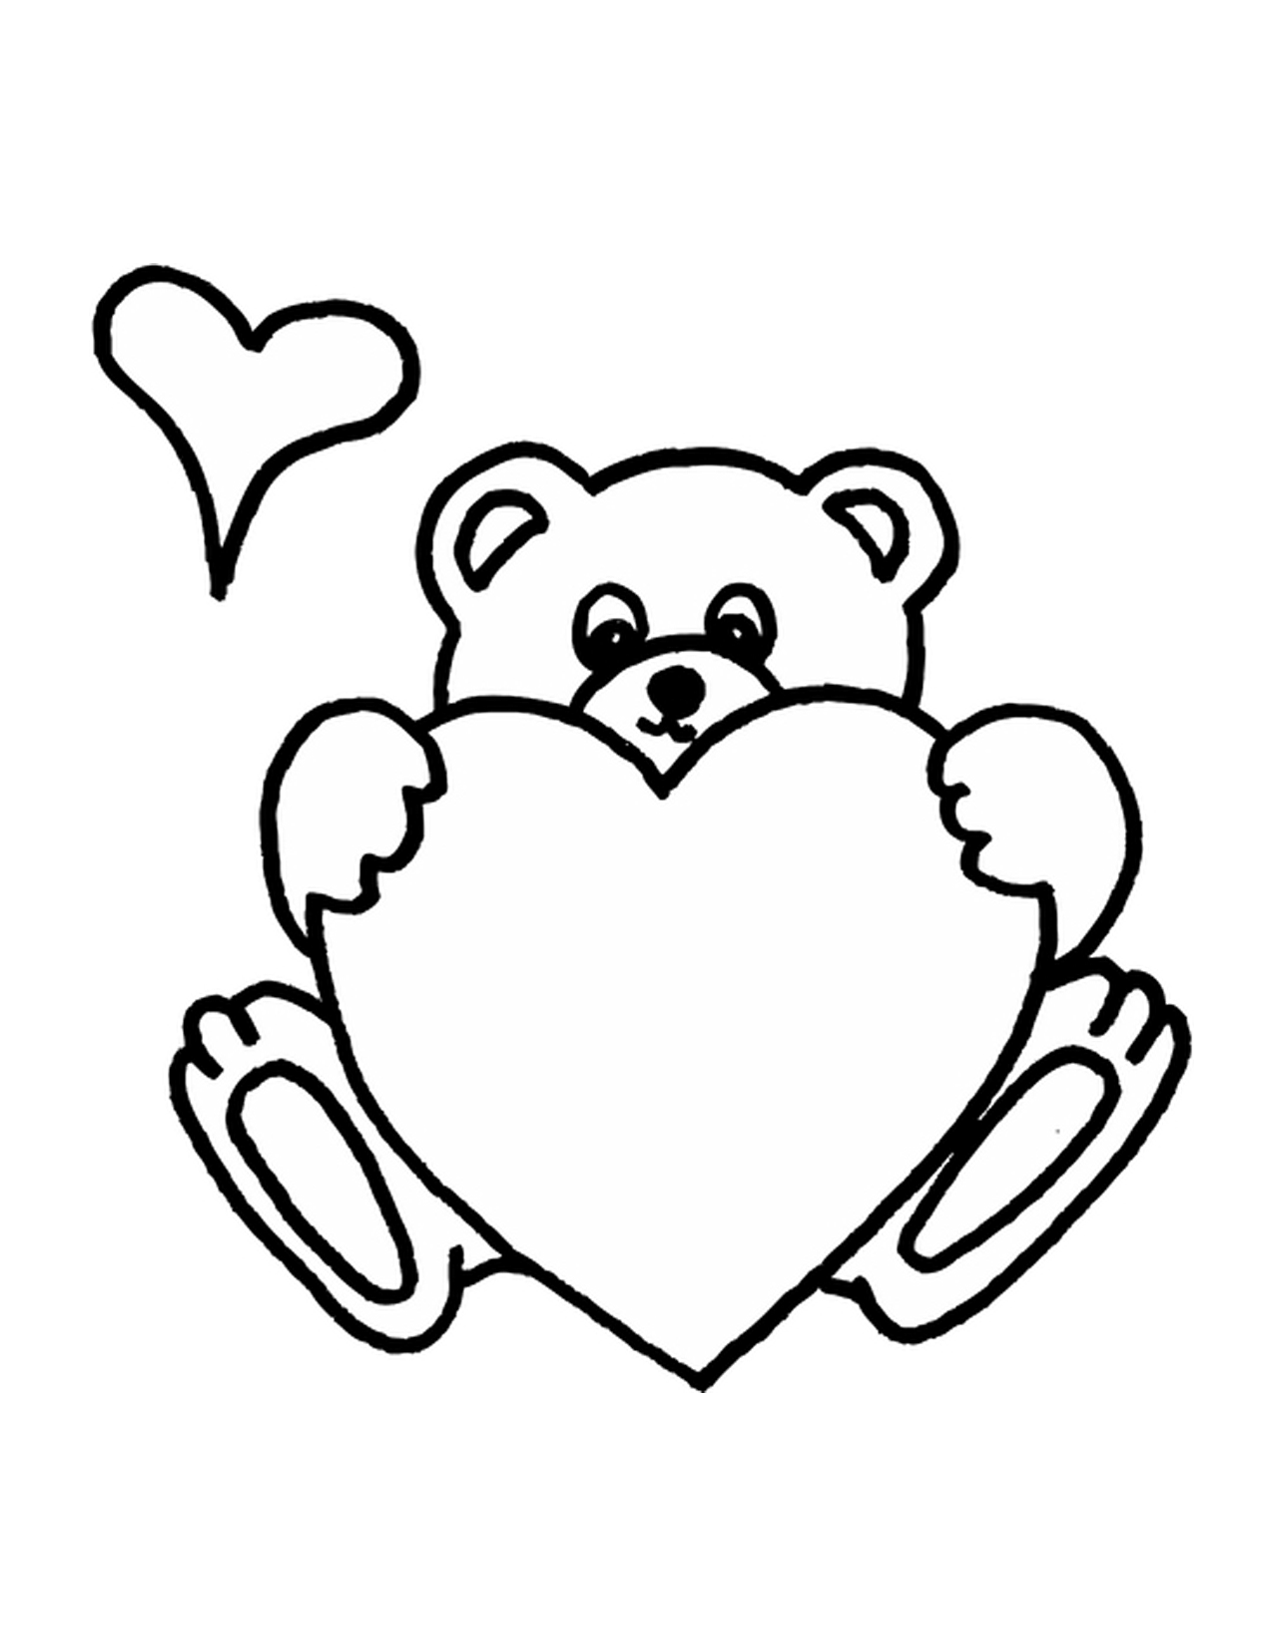 Teddy Bear Coloring Pages Printable - Customize and Print